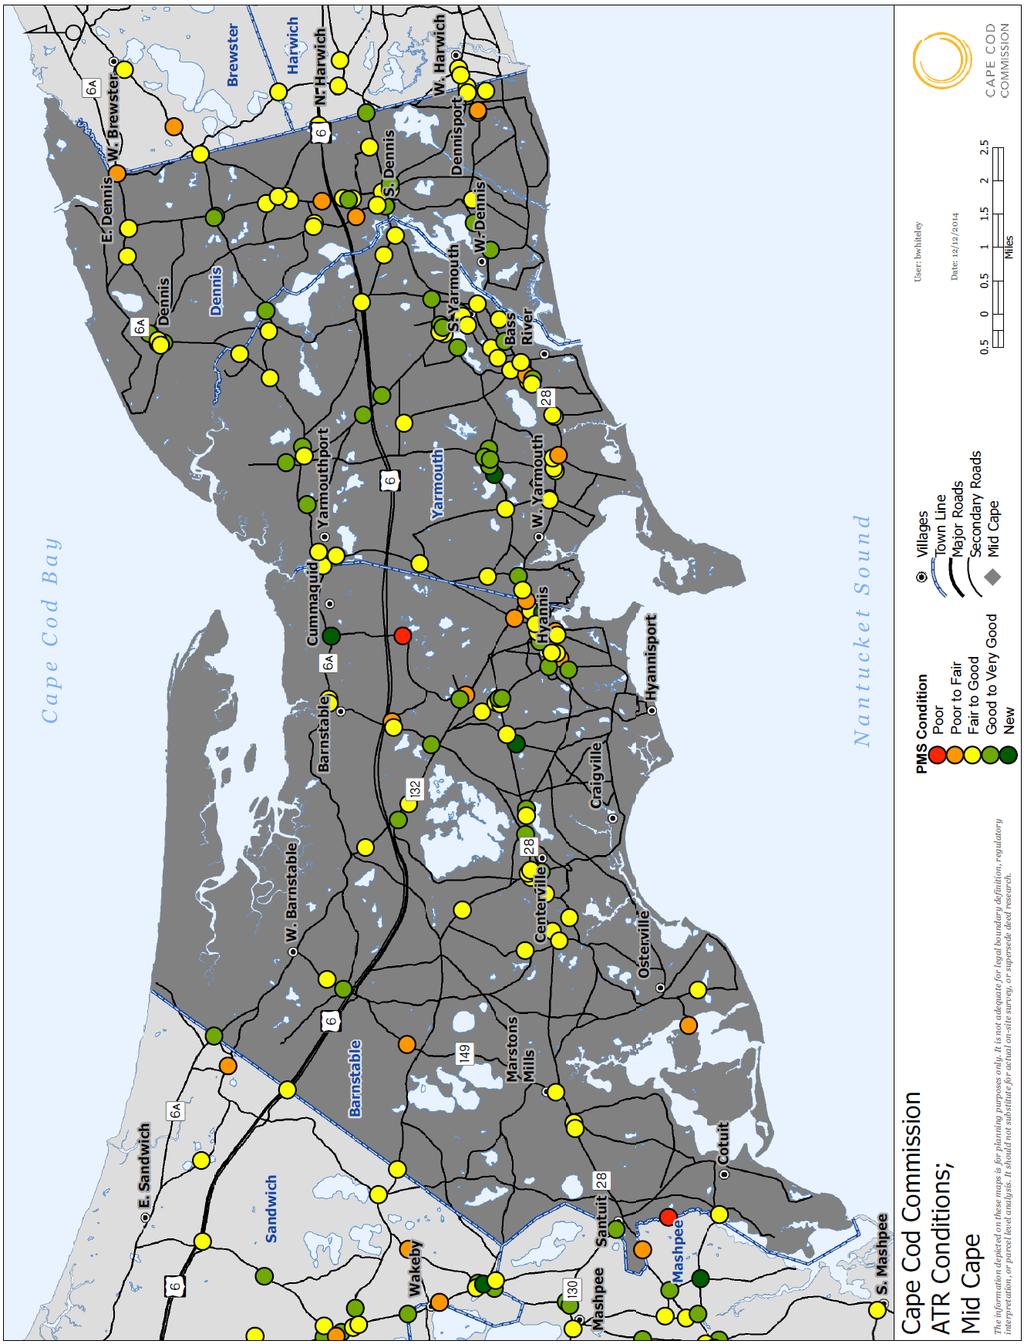 FIGURE 10-2011-2014 PAVEMENT CONDITIONS AT ATR LOCATIONS: MID-CAPE Cape